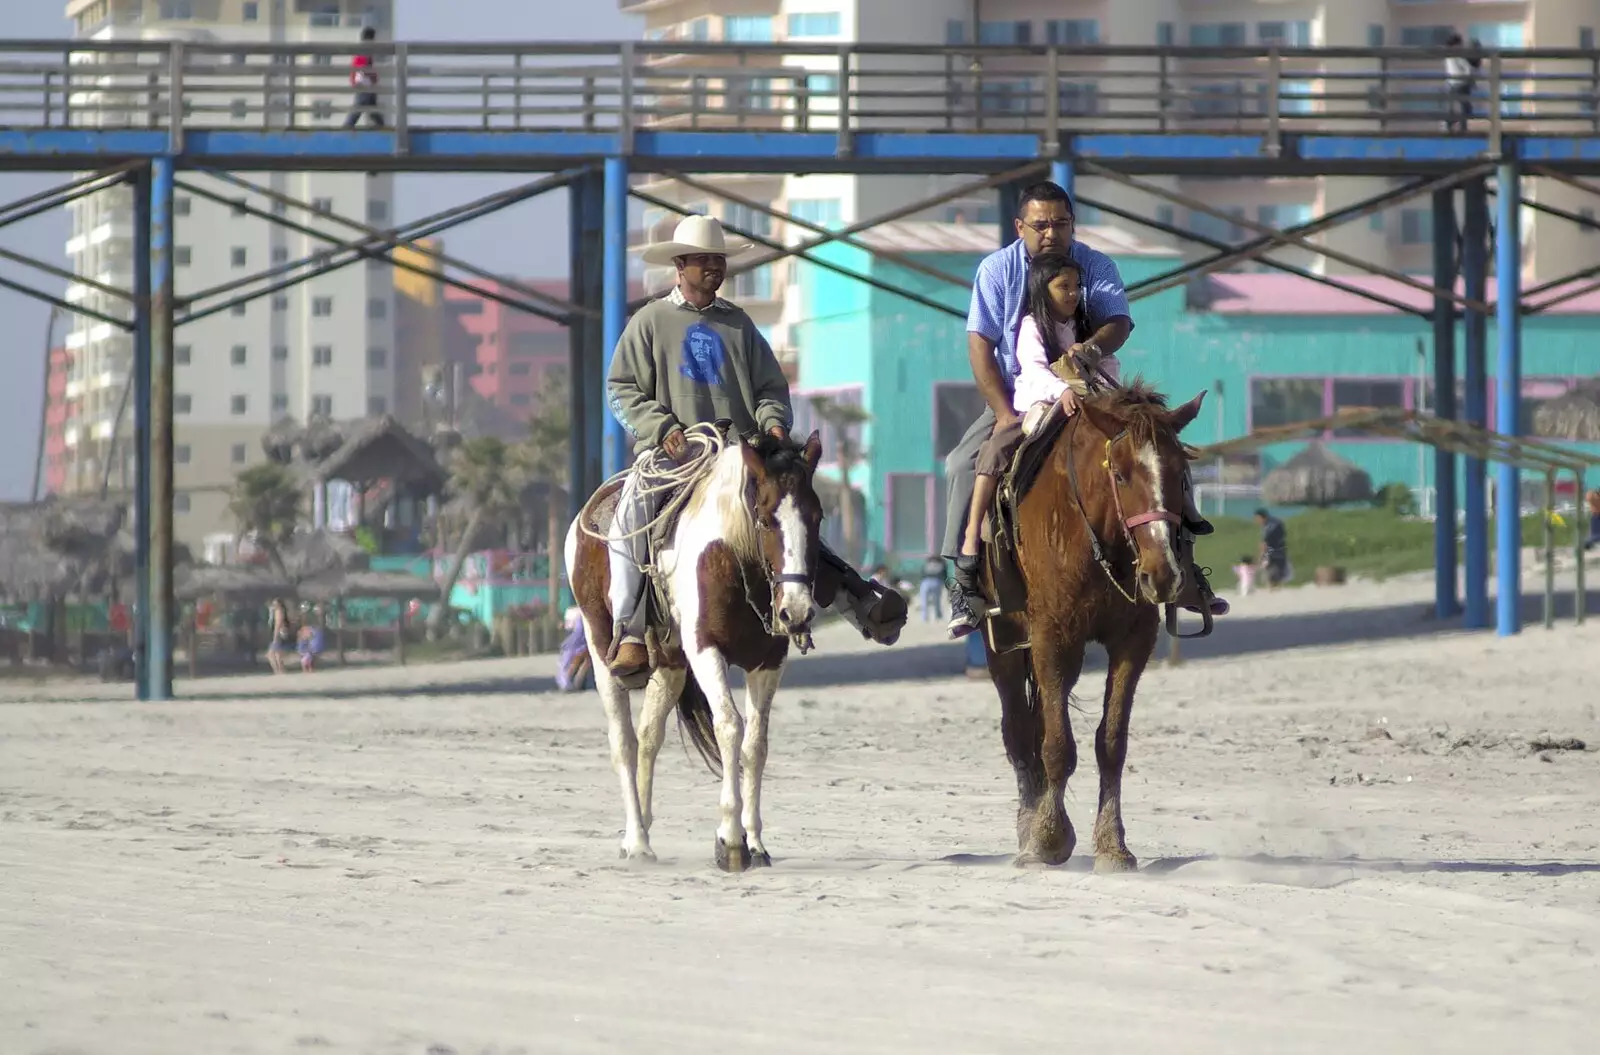 Ponies trot on the beach, from Rosarito and Tijuana, Baja California, Mexico - 2nd March 2008